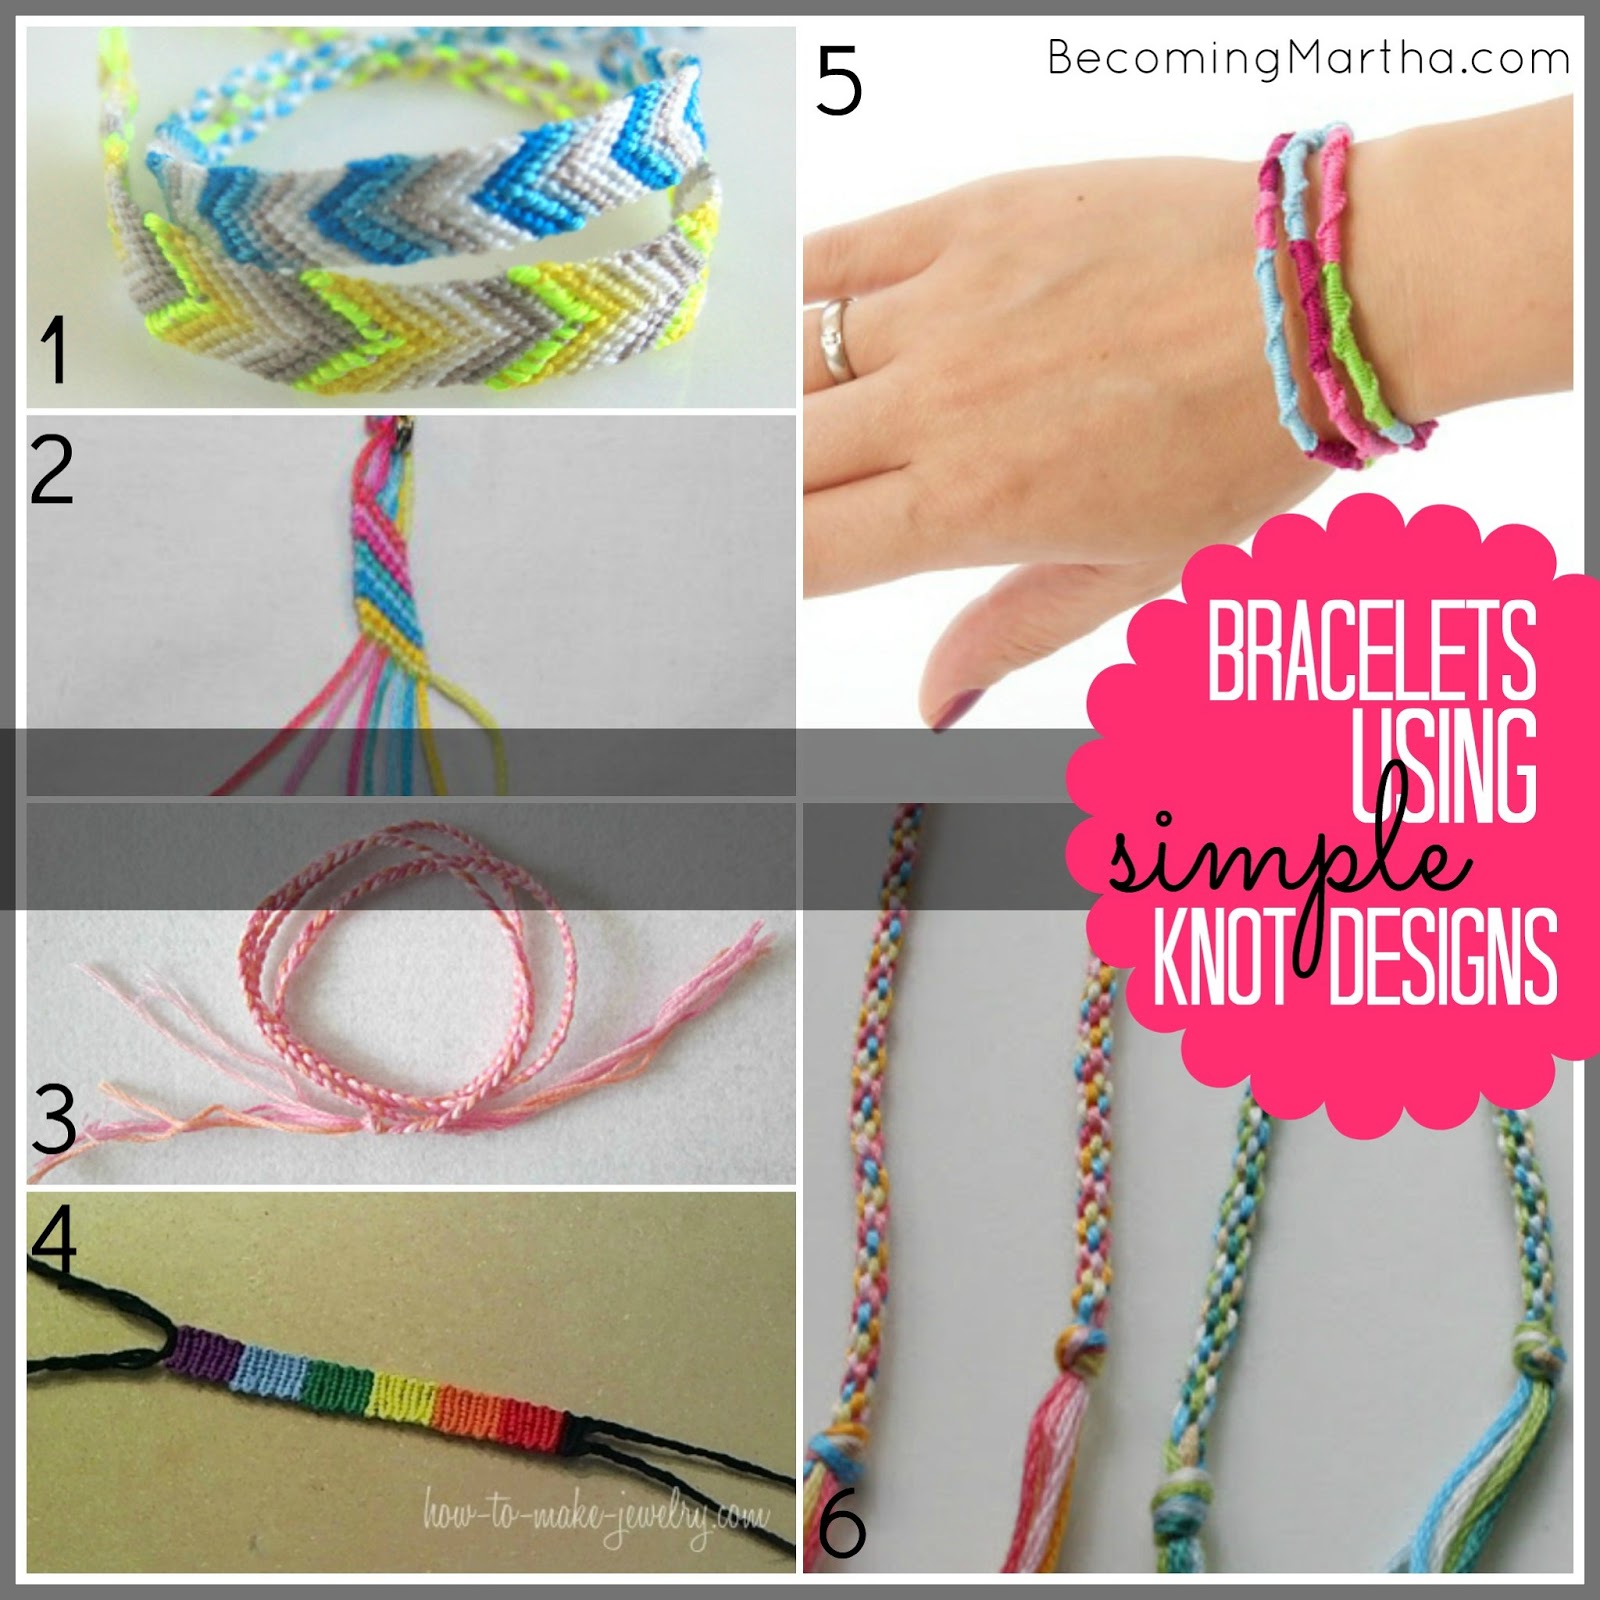 20 Friendship Bracelet Tutorials from 1 Supply - The Simply Crafted Life